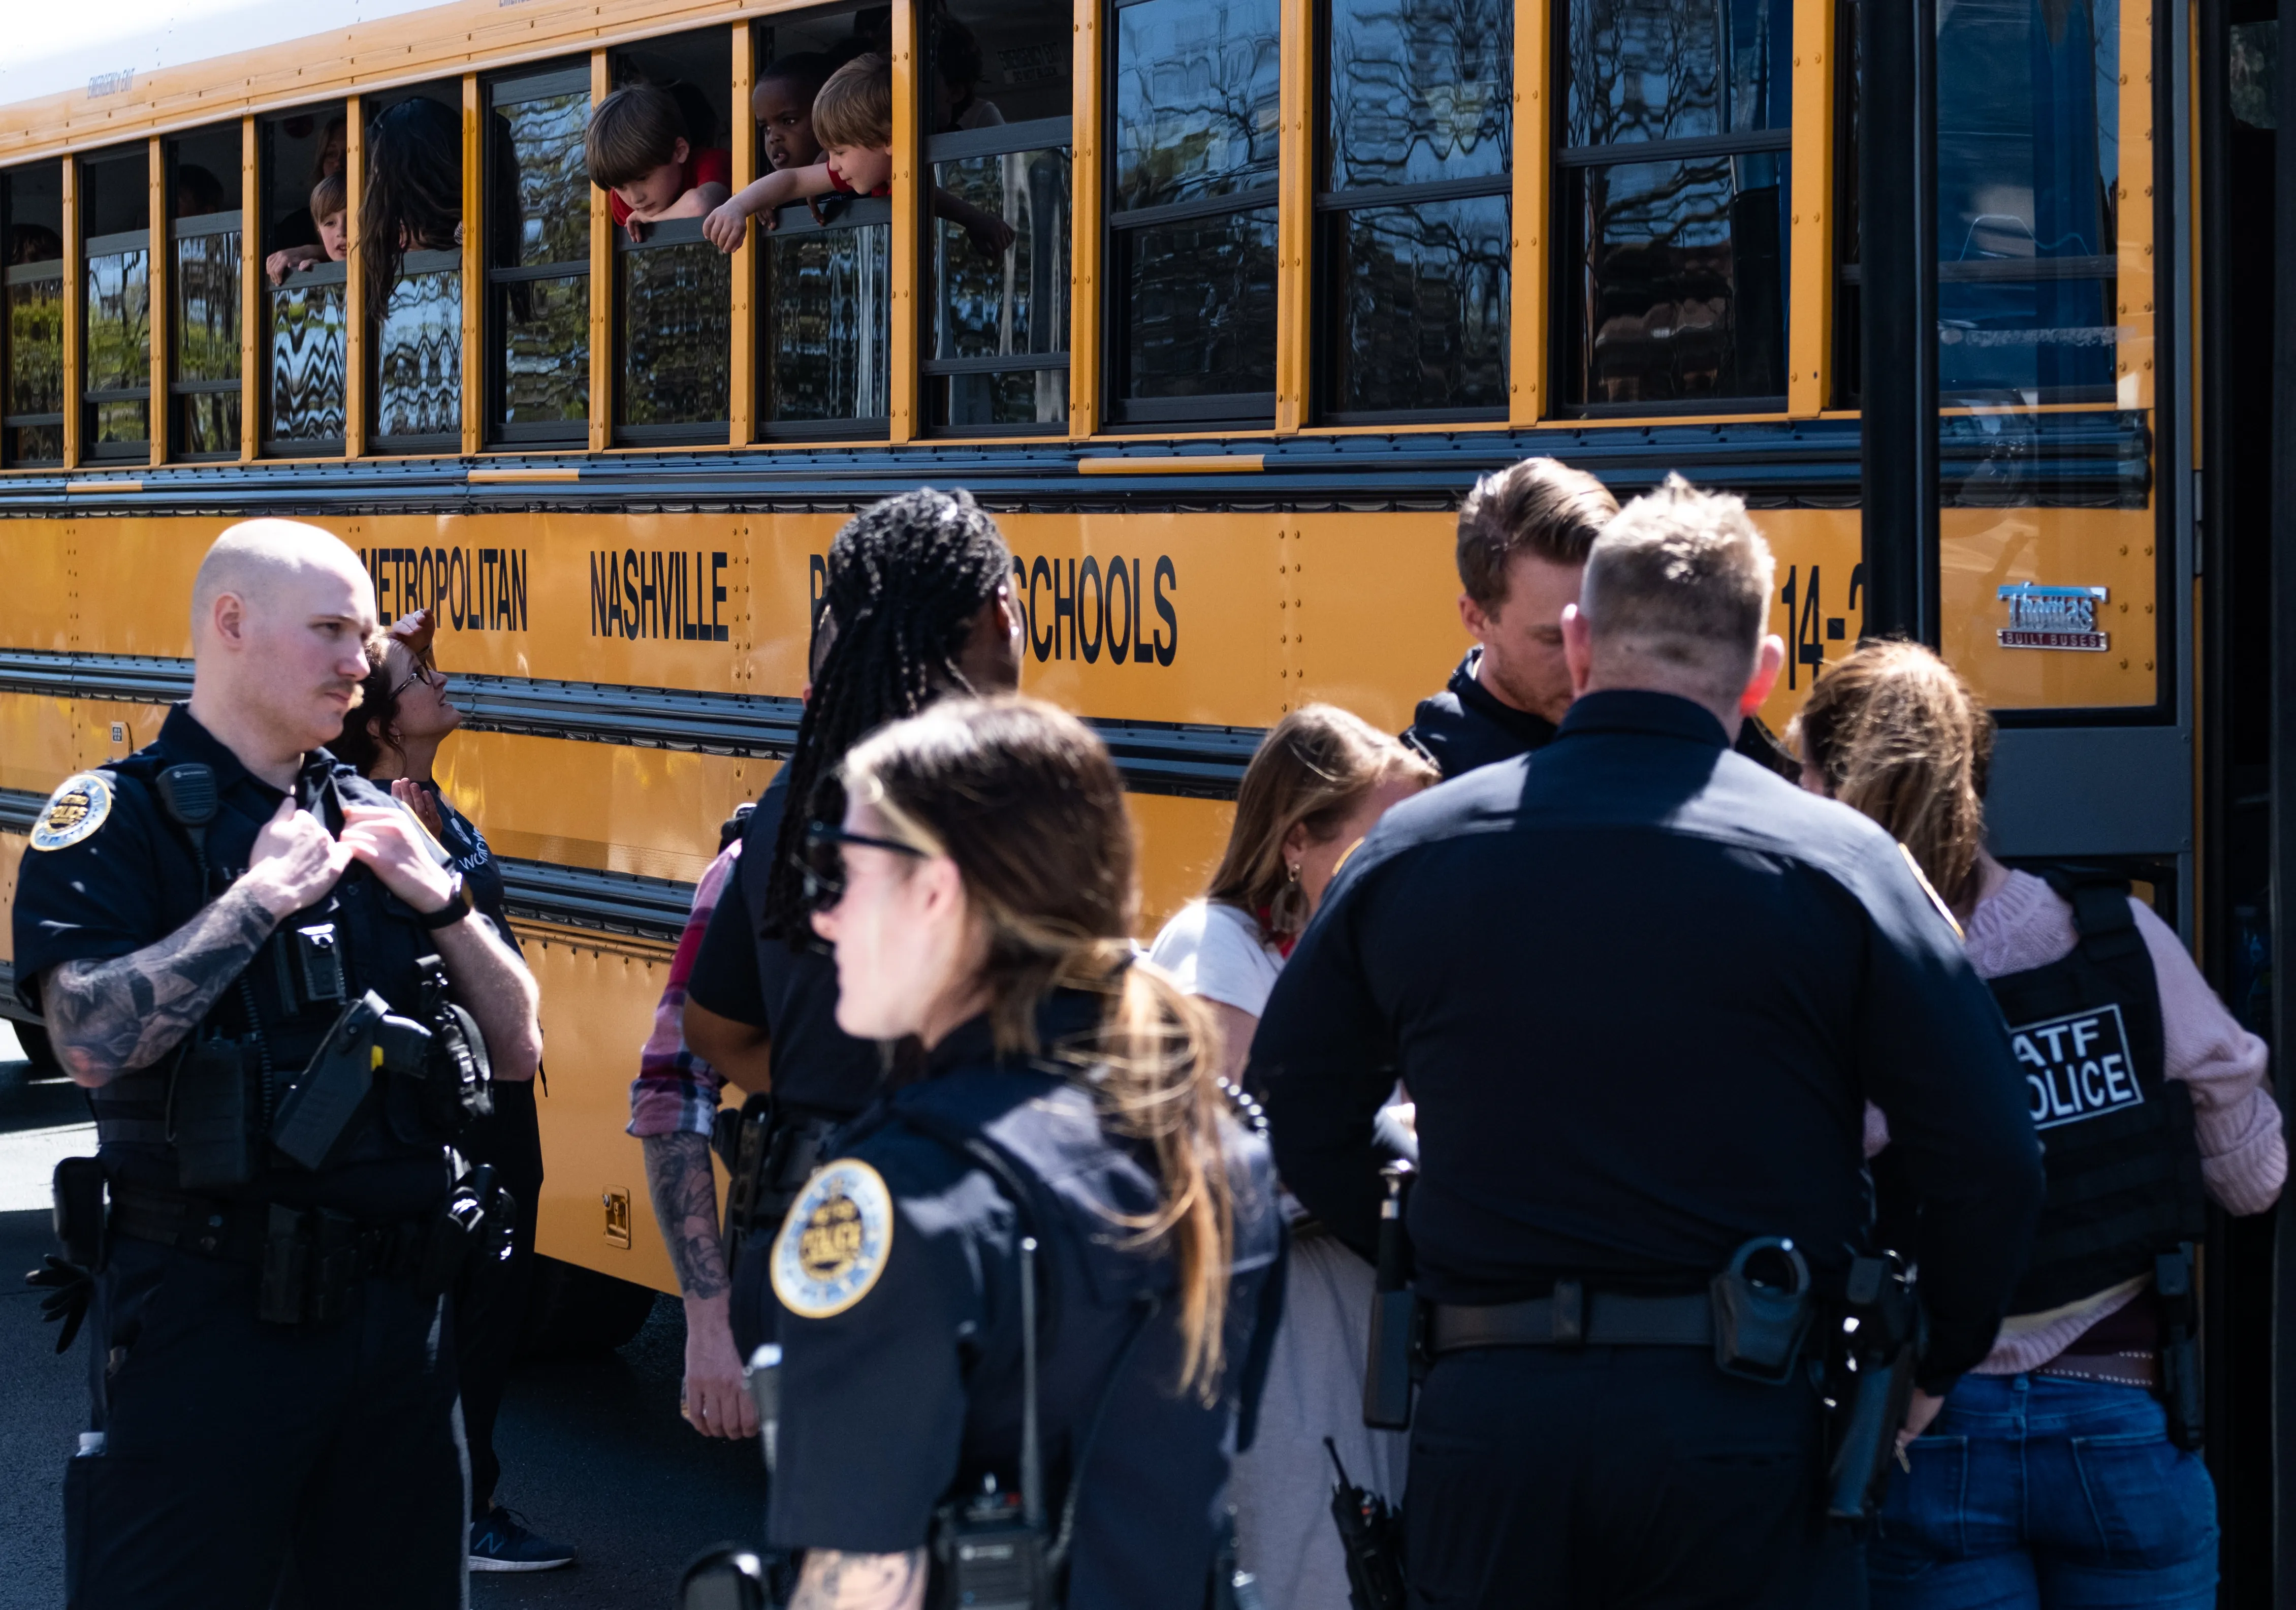 Read 5 Steps to Prep Your School Communications for Swatting